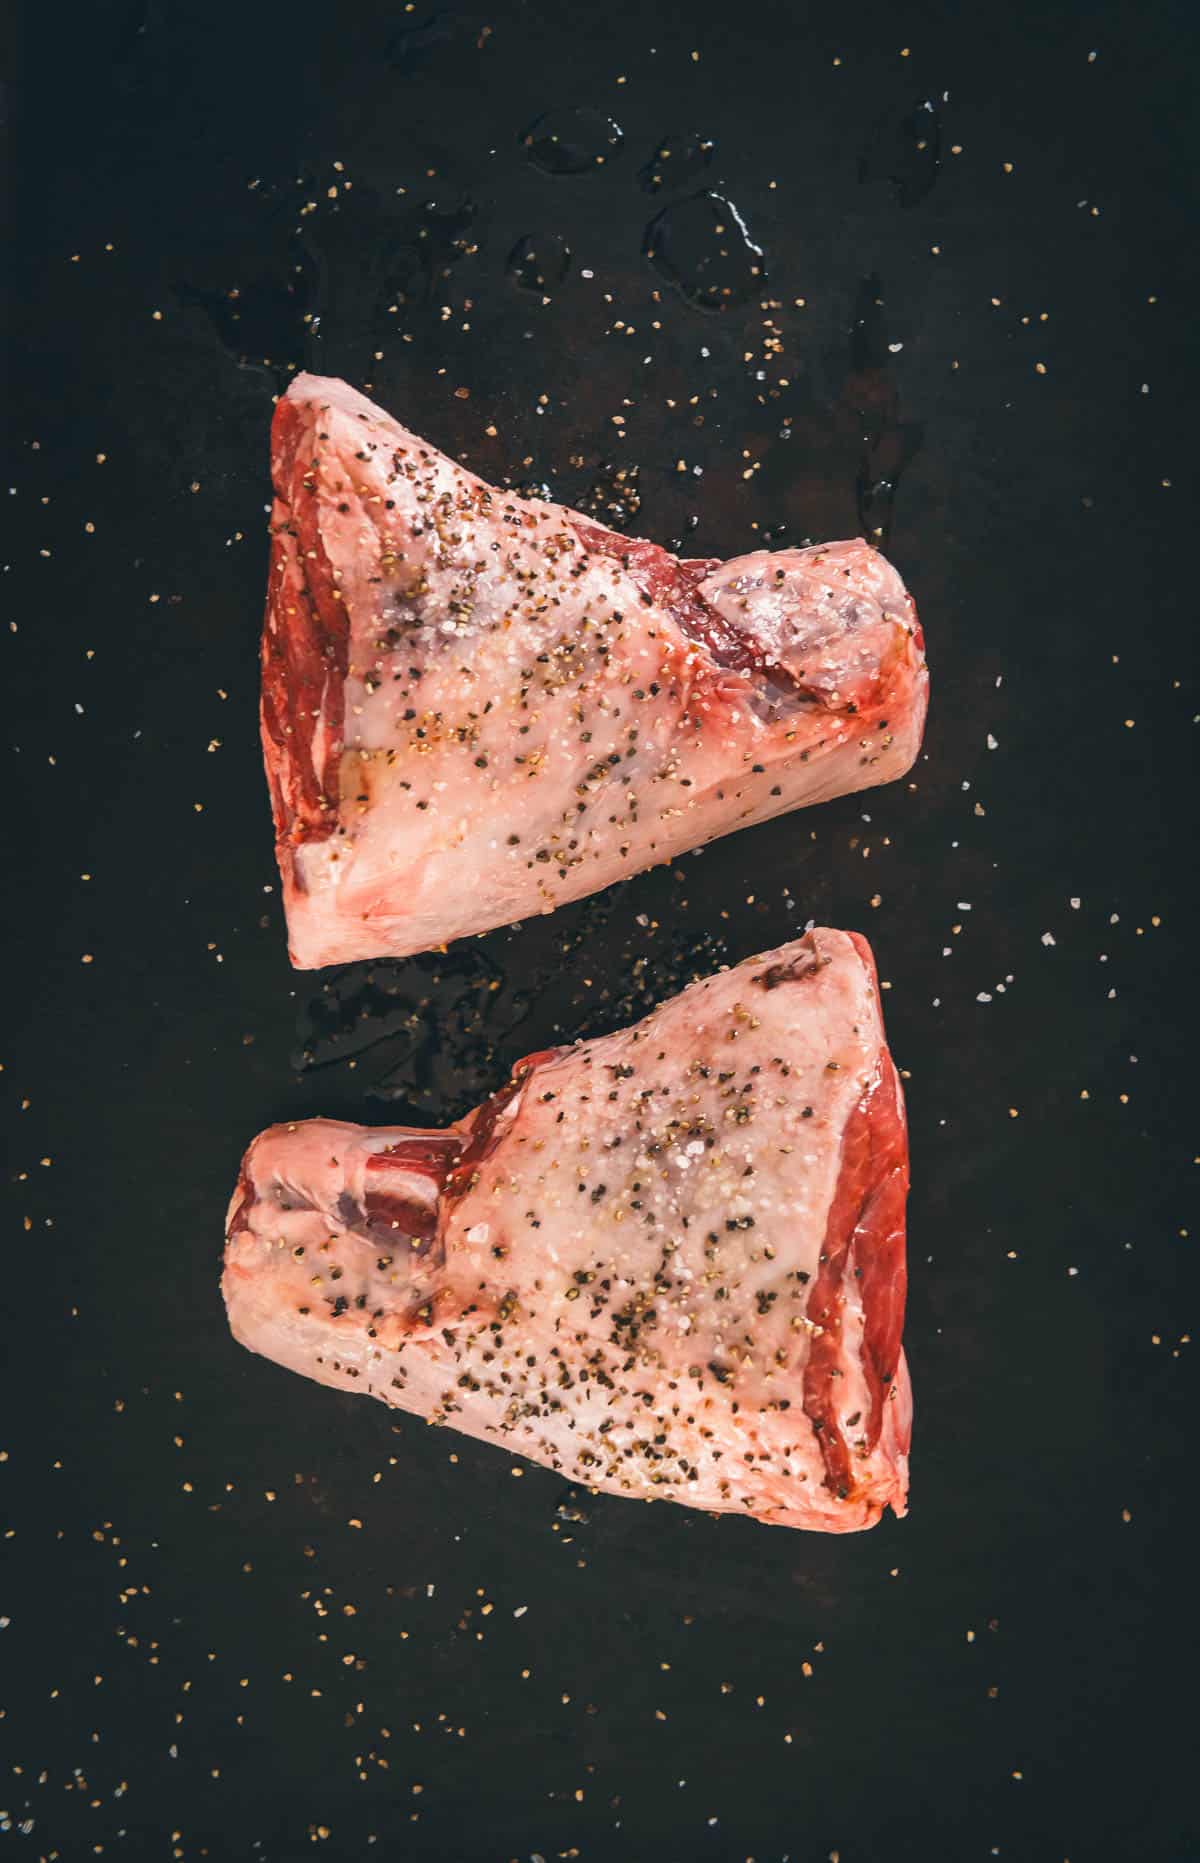 Two pieces of lamb on a black background.